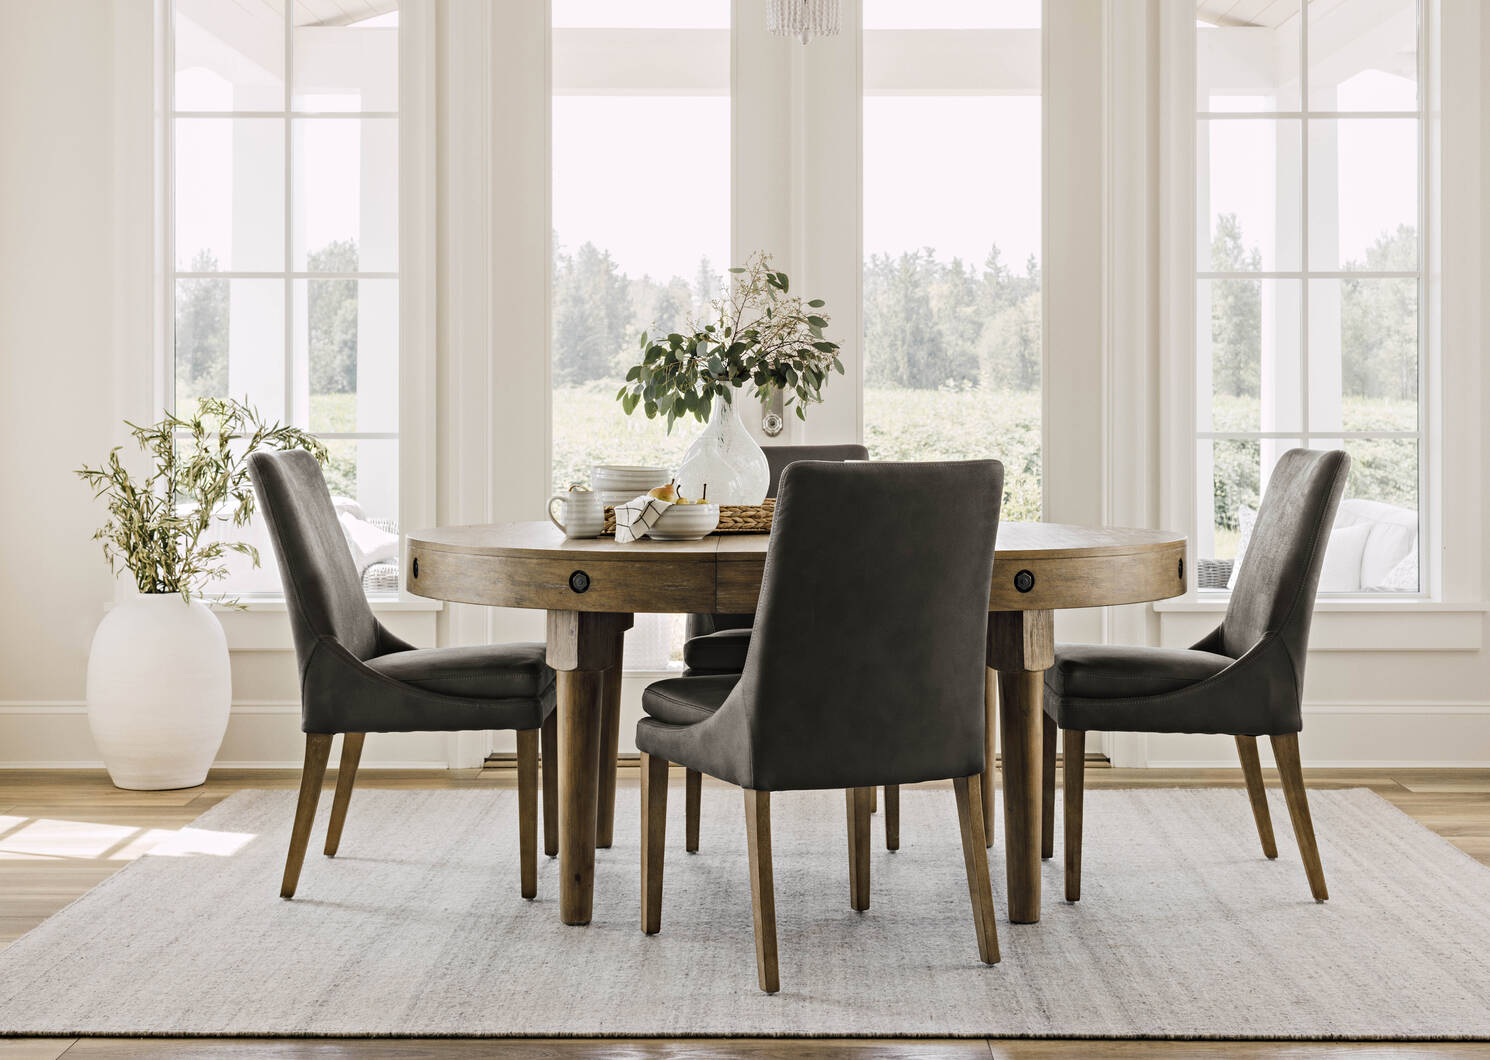 Pinehurst Ext Dining Table Rnd -Claire F